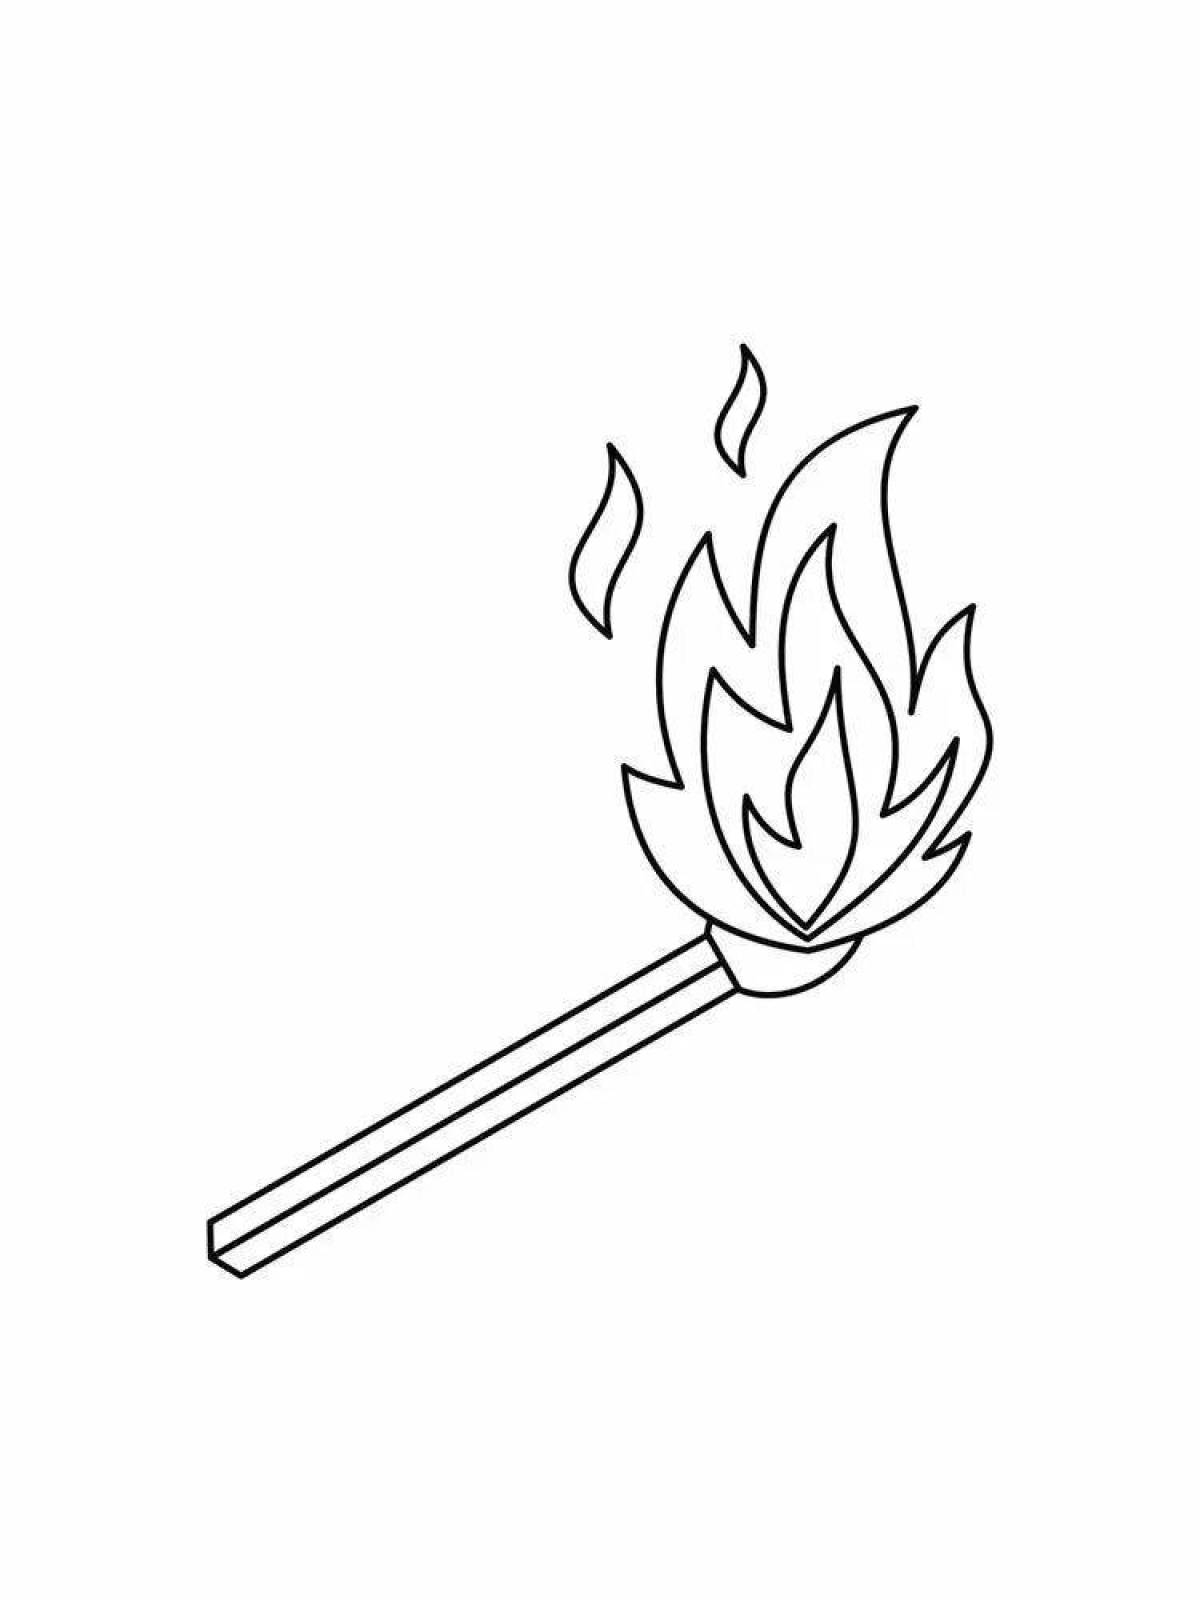 Flame coloring book